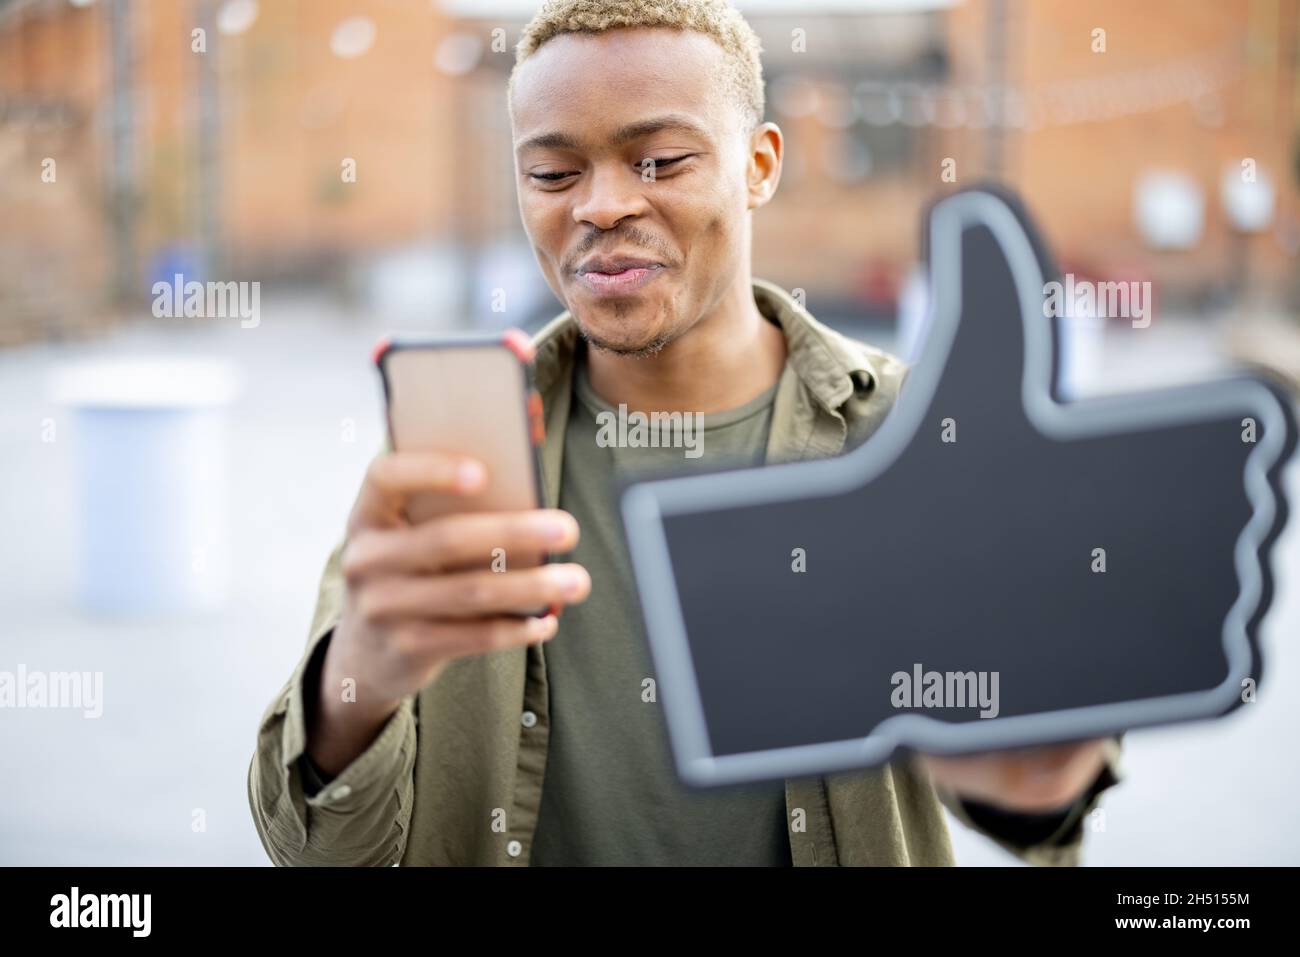 Guy use smartphone and showing thumb up Stock Photo